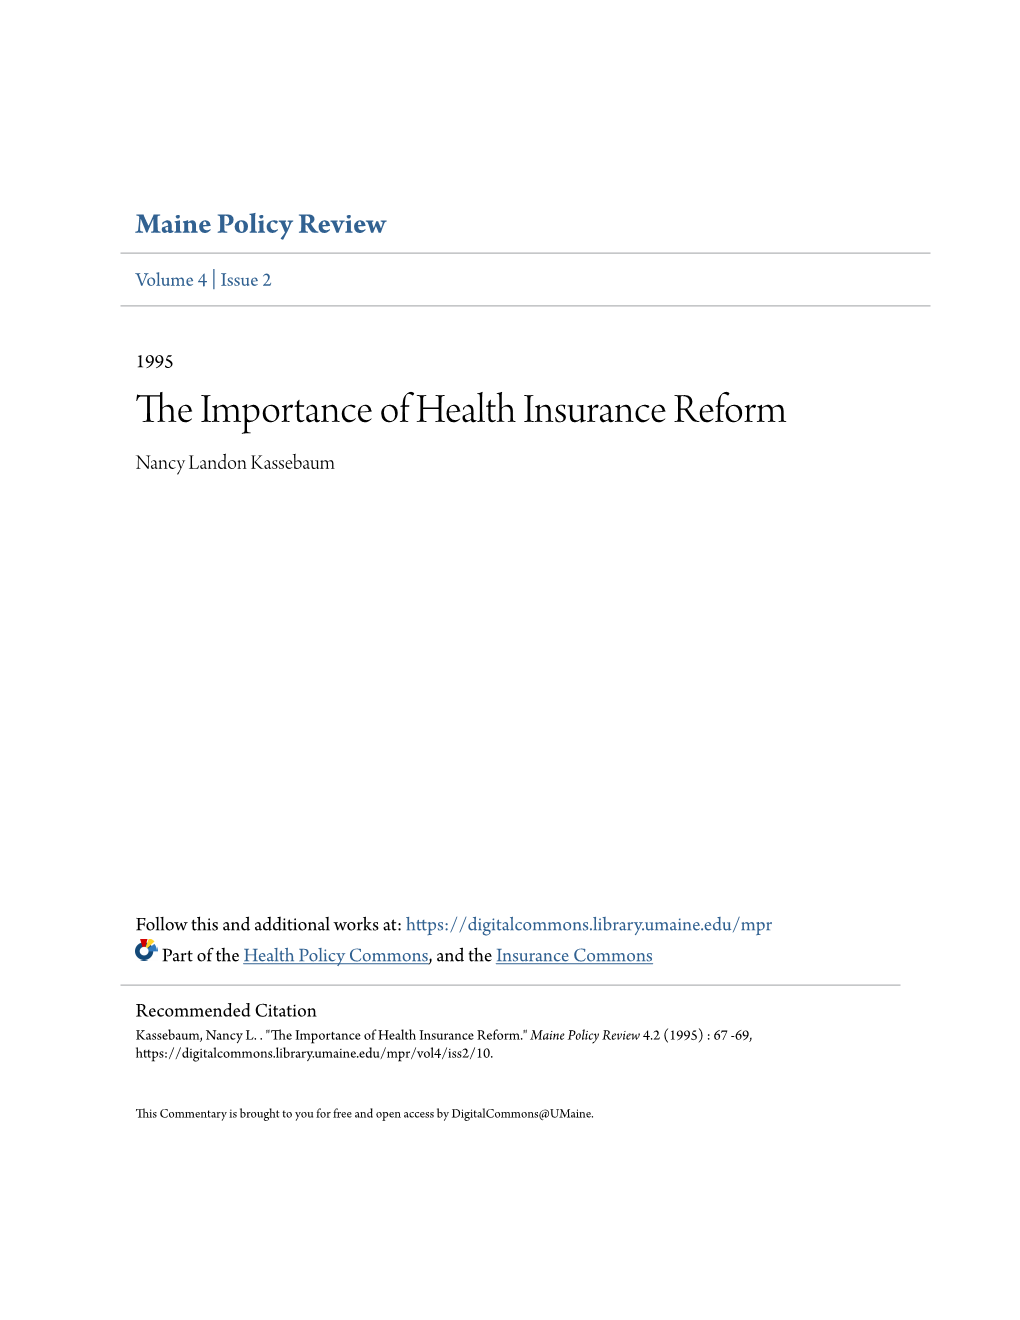 The Importance of Health Insurance Reform